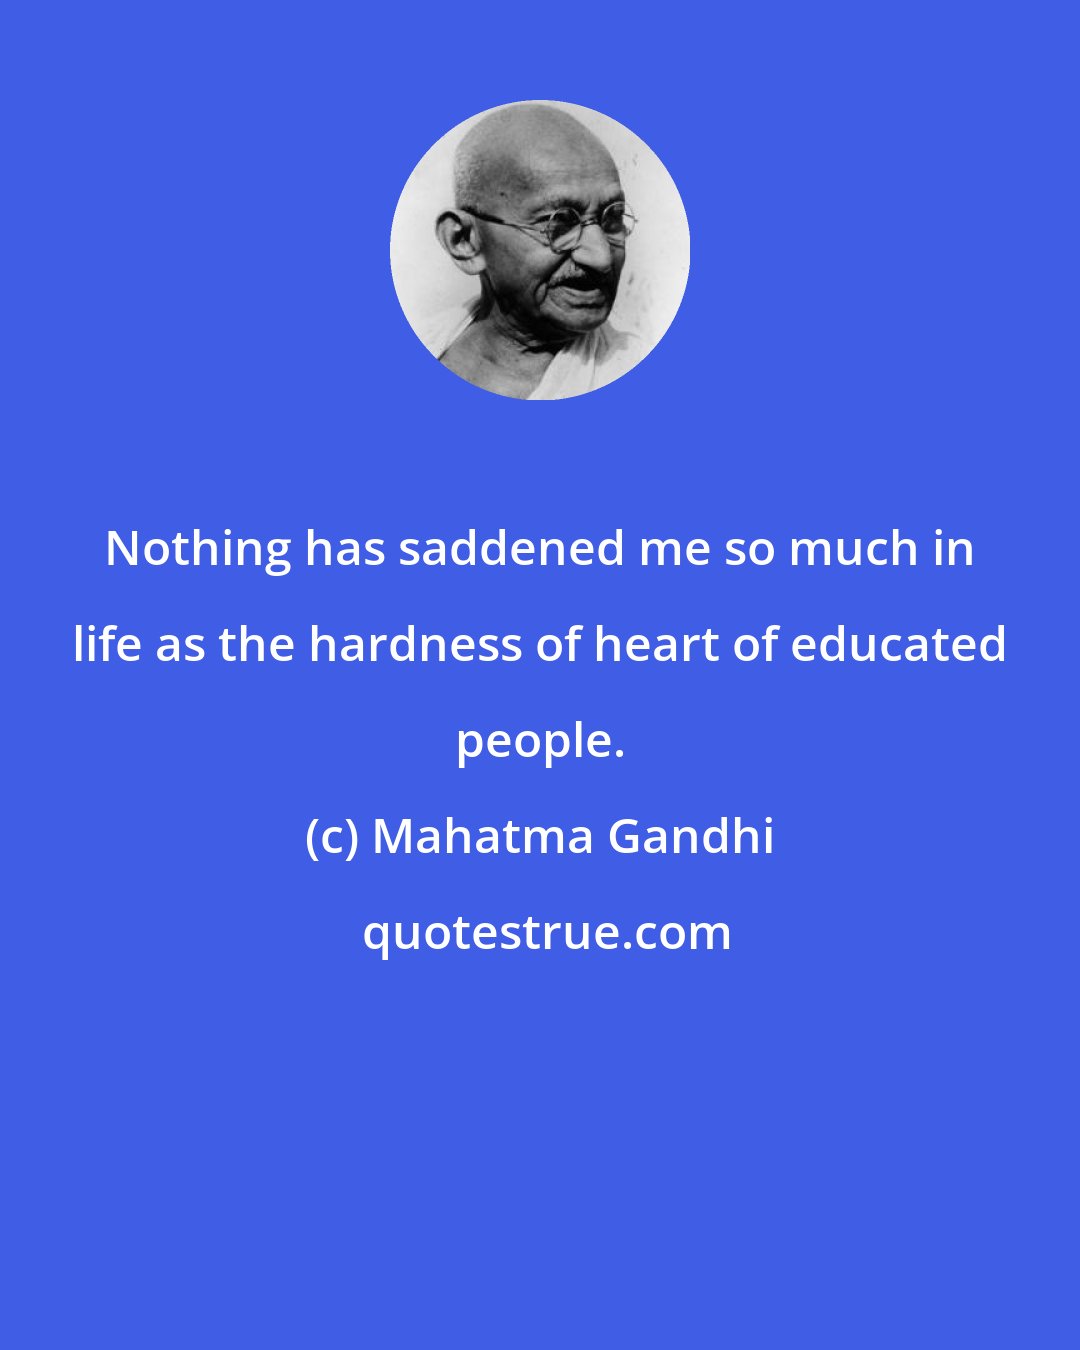 Mahatma Gandhi: Nothing has saddened me so much in life as the hardness of heart of educated people.